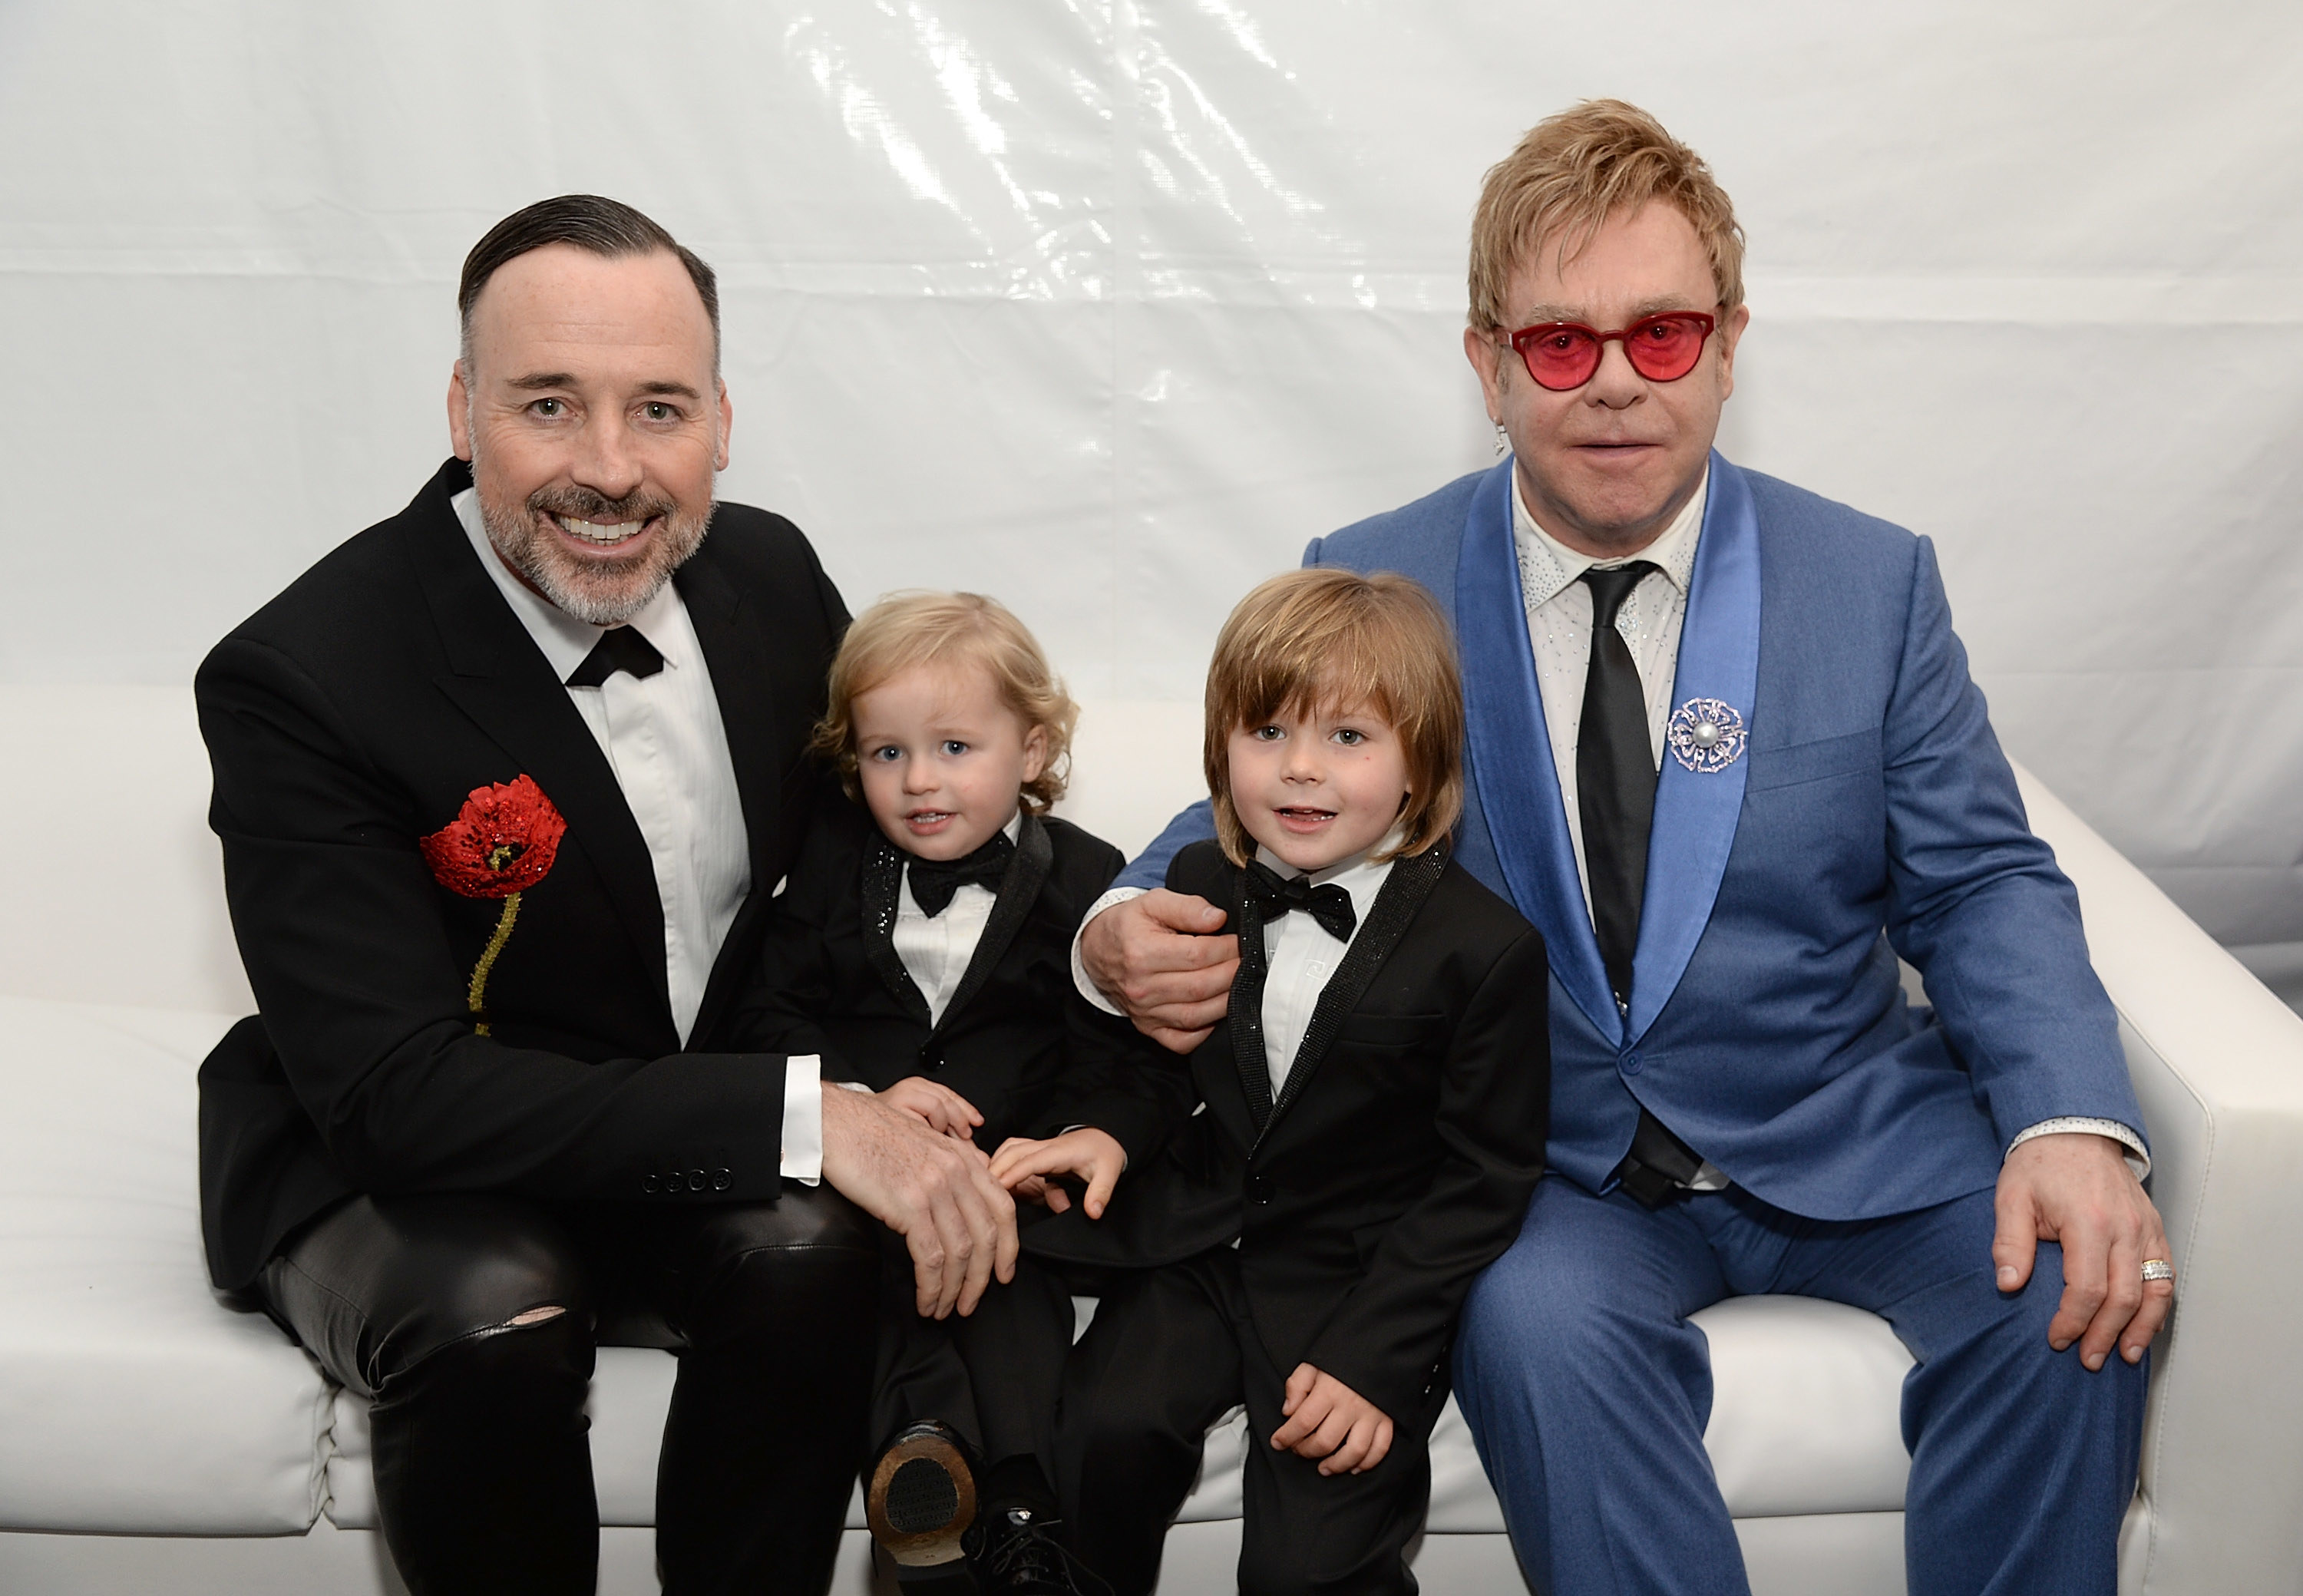 Elton John and his husband and children